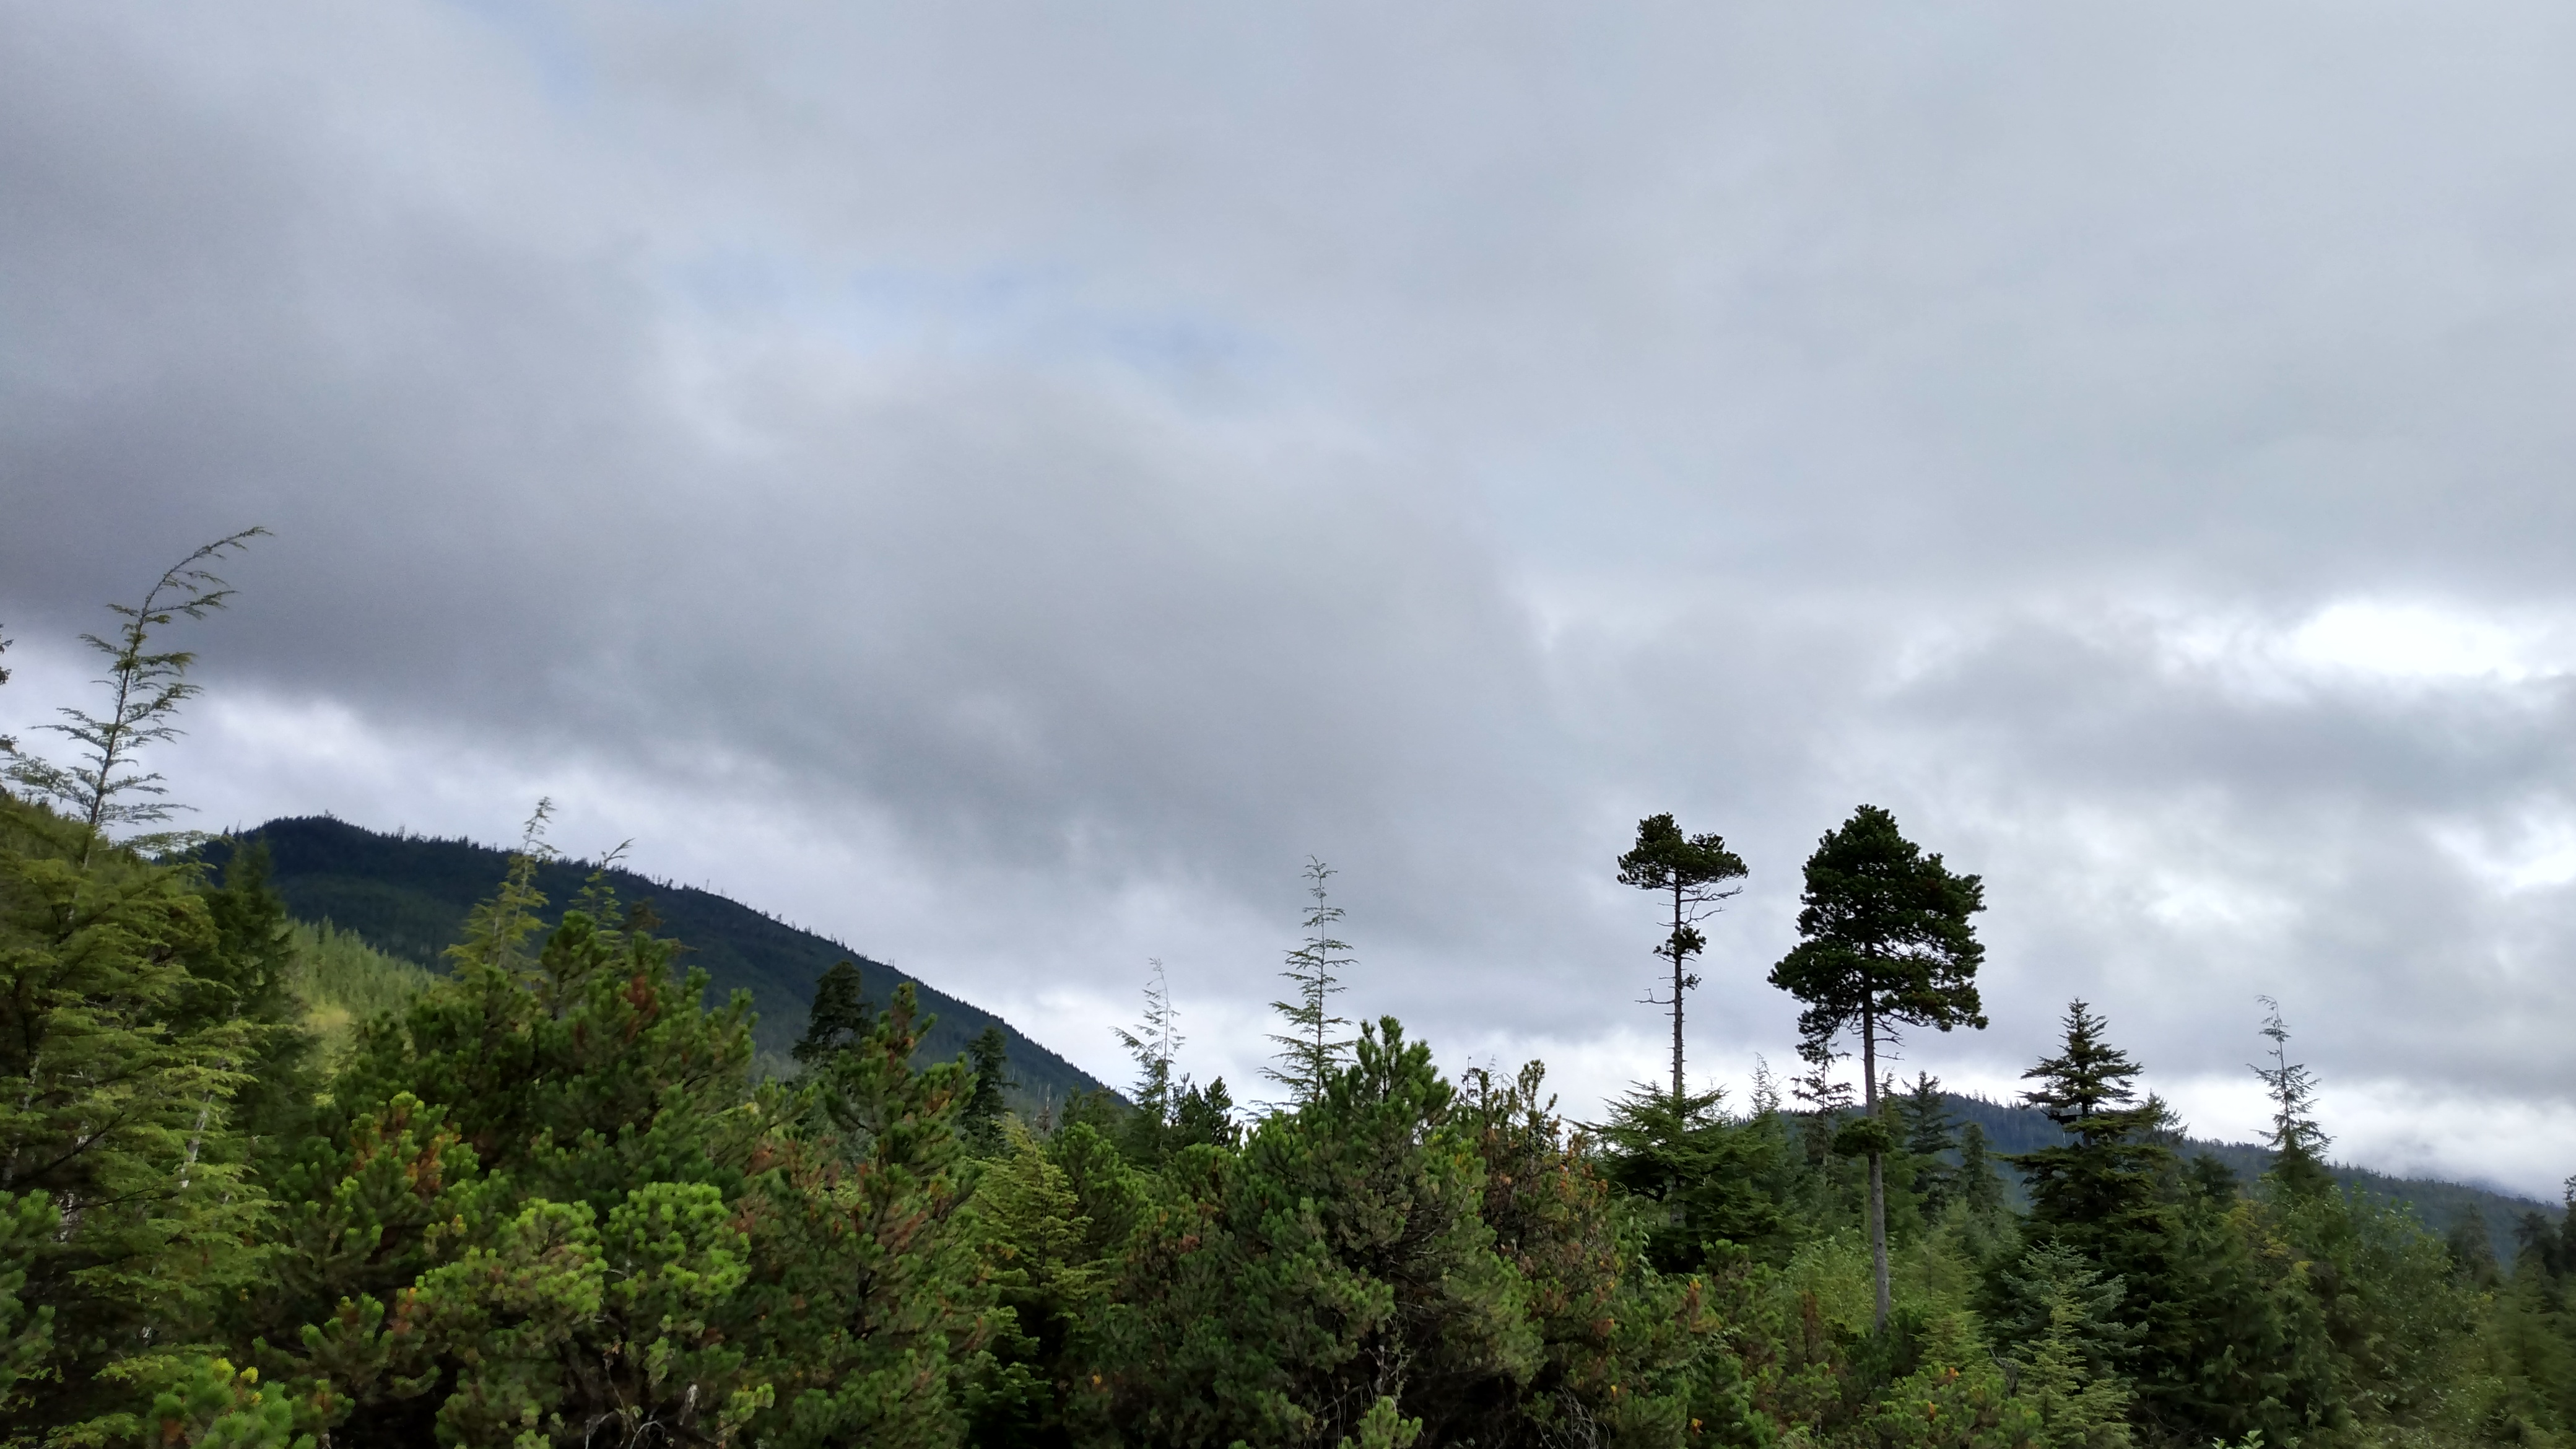 A panorama of trees with some (a few pines) sticking up higher than others, under cloudy skies